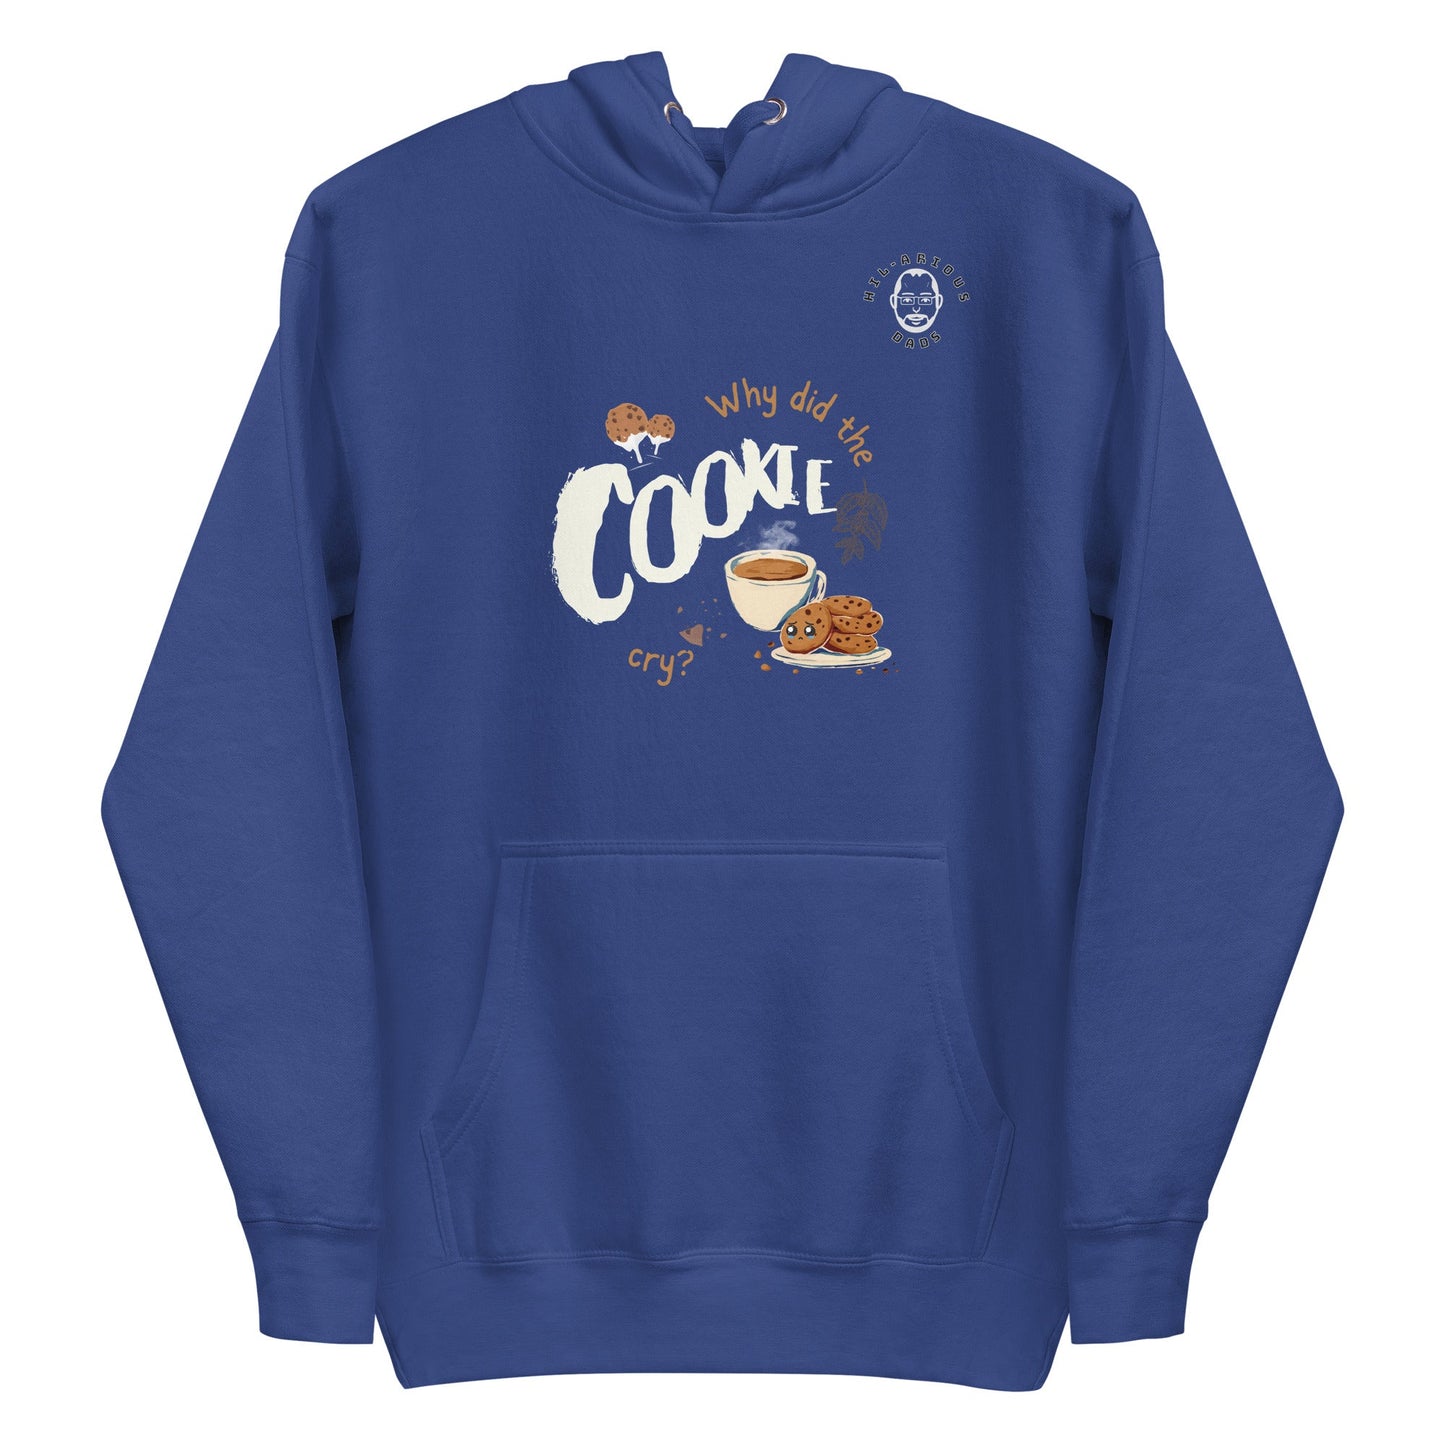 Why did the cookie cry?-Hoodie - Hil-arious Dads